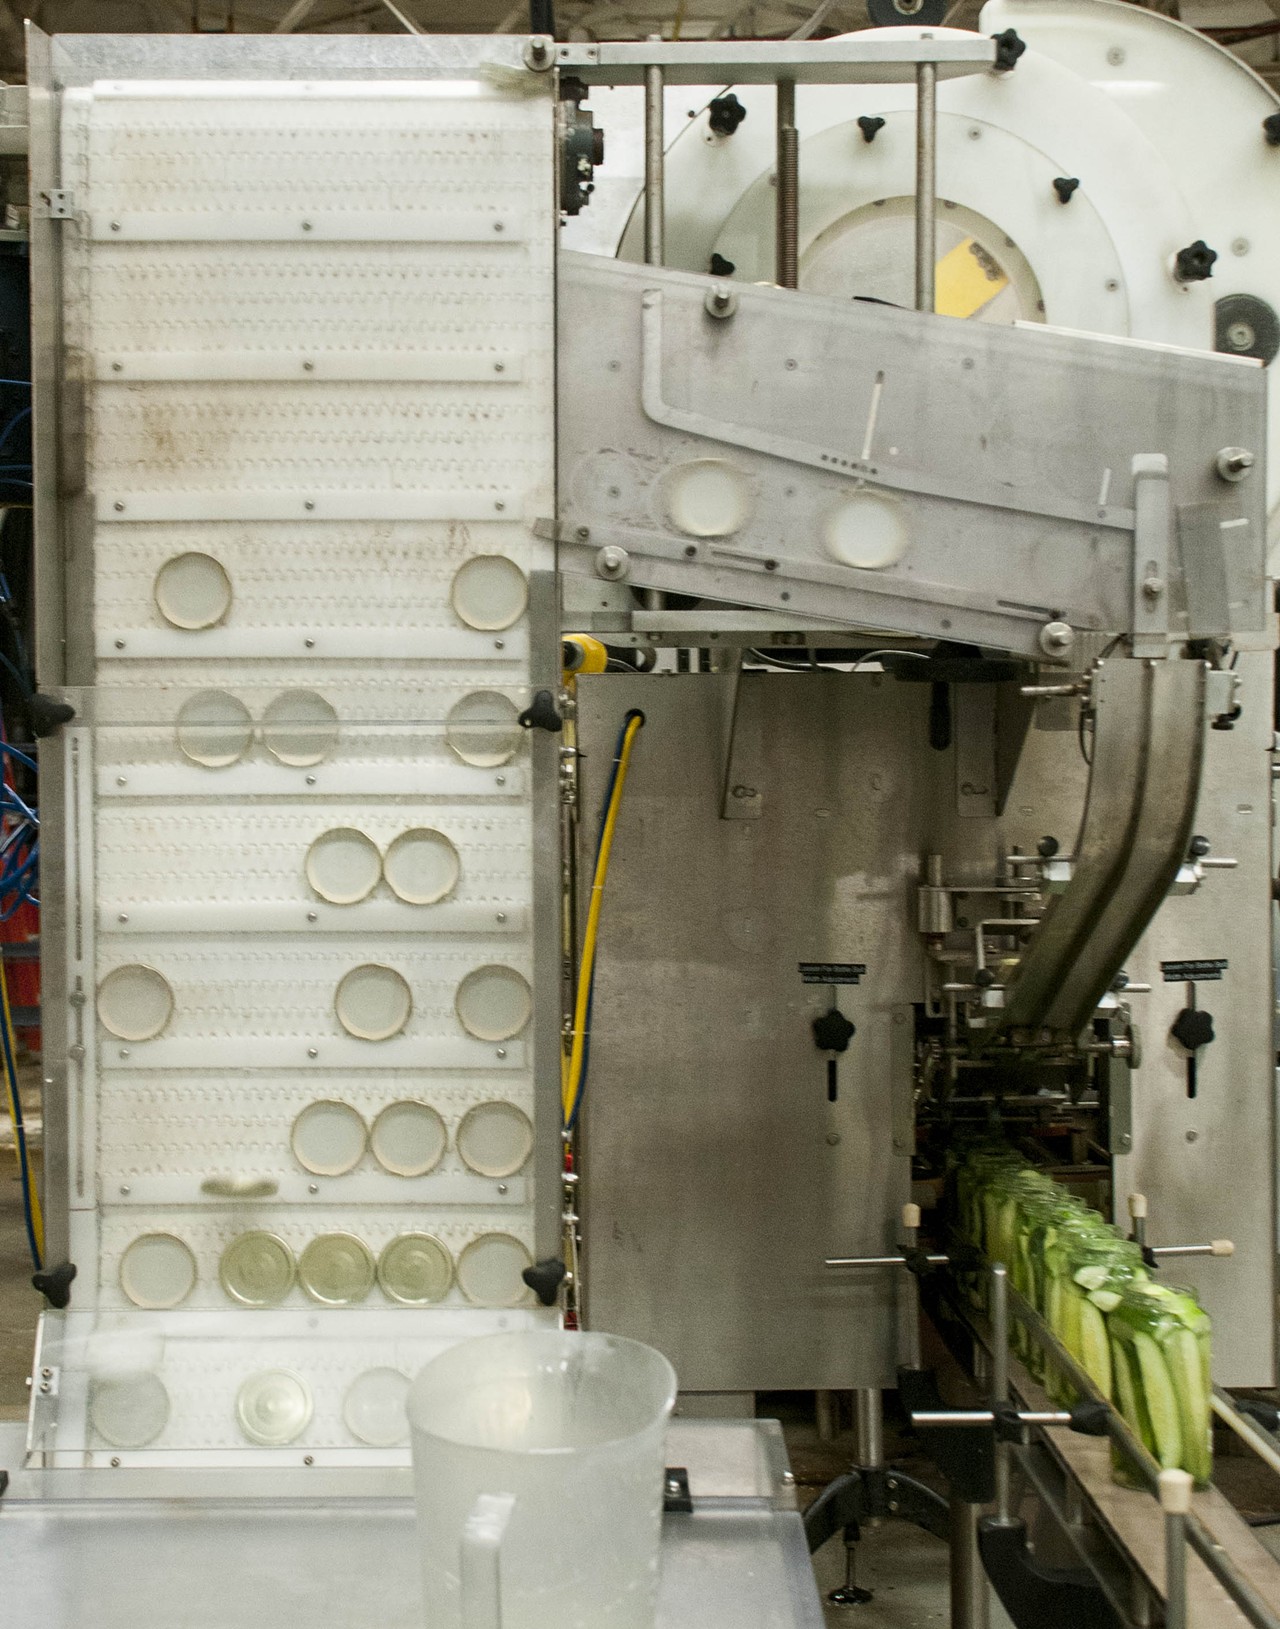 The capping machine's vertical conveyor pulls lids above the jars.